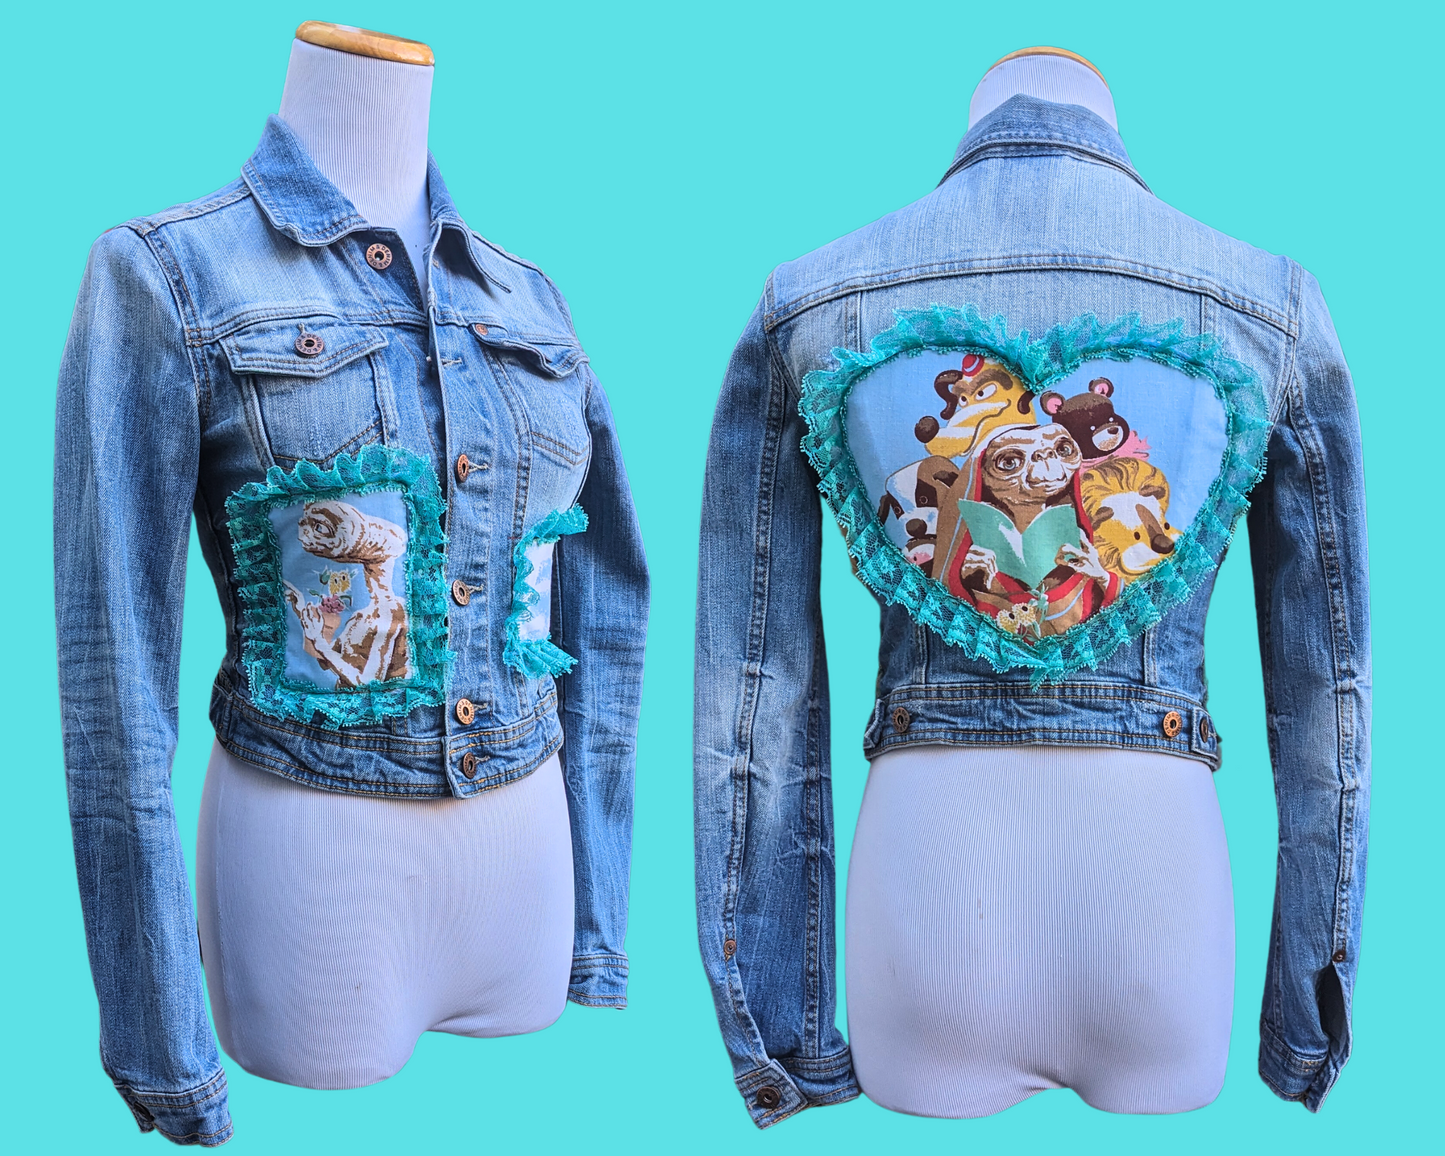 Handmade, Upcycled Denim Jacket Patched Up with Bedsheets Scraps of E.T Size S